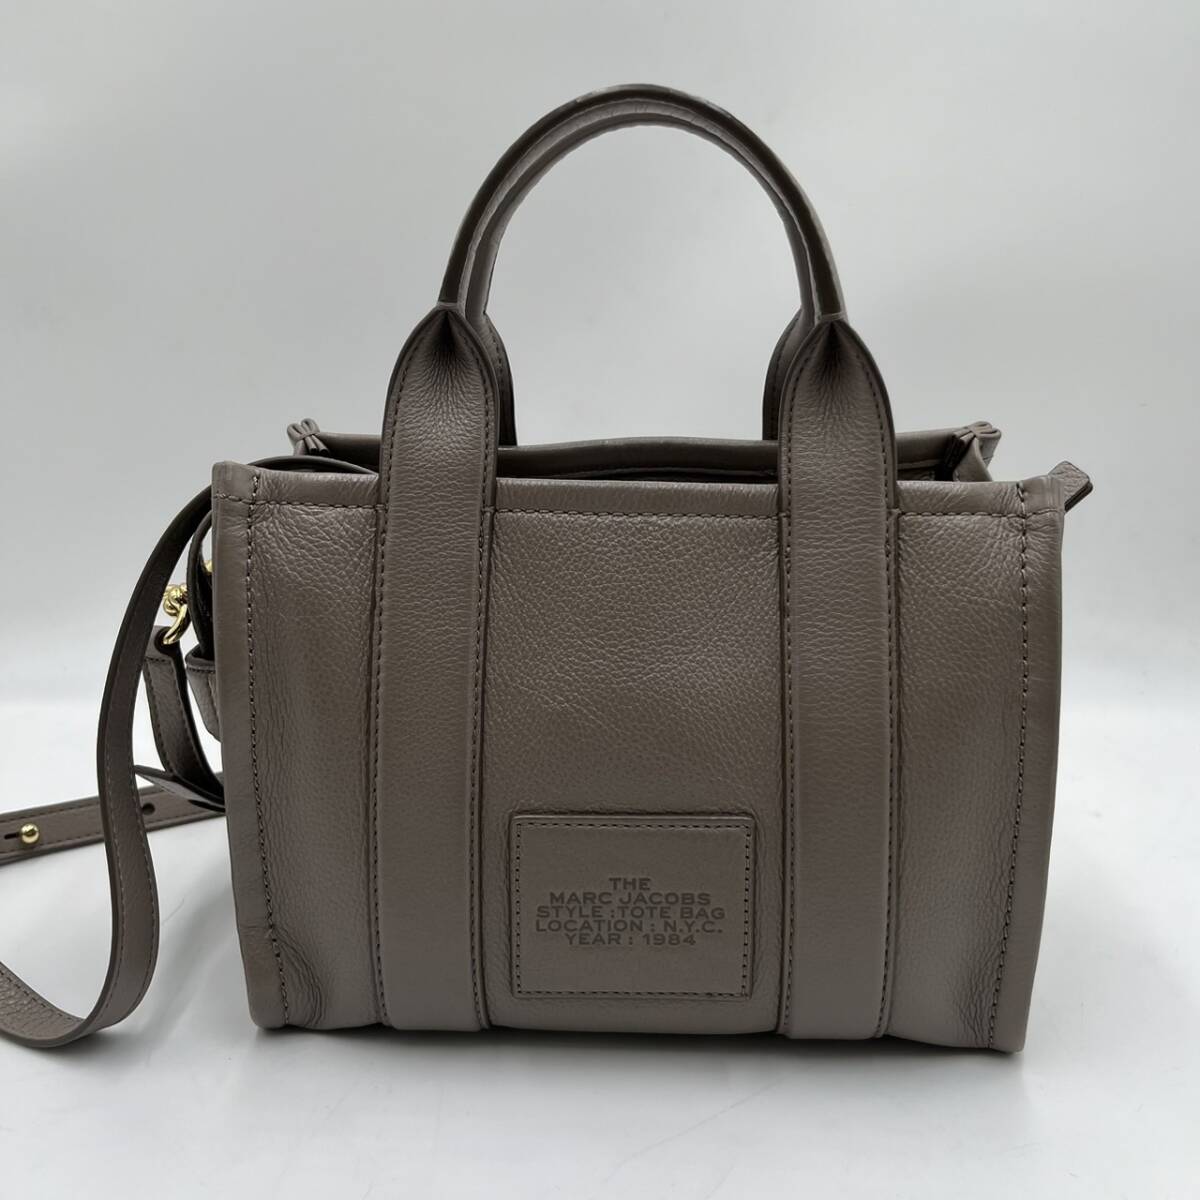 MARC JACOBS マークジェイコブス レザー スモール トートバッグ THE LEATHER SMALL TOTE BAG H009L01SP21 055 2way ショルダー ベージュ系の画像2